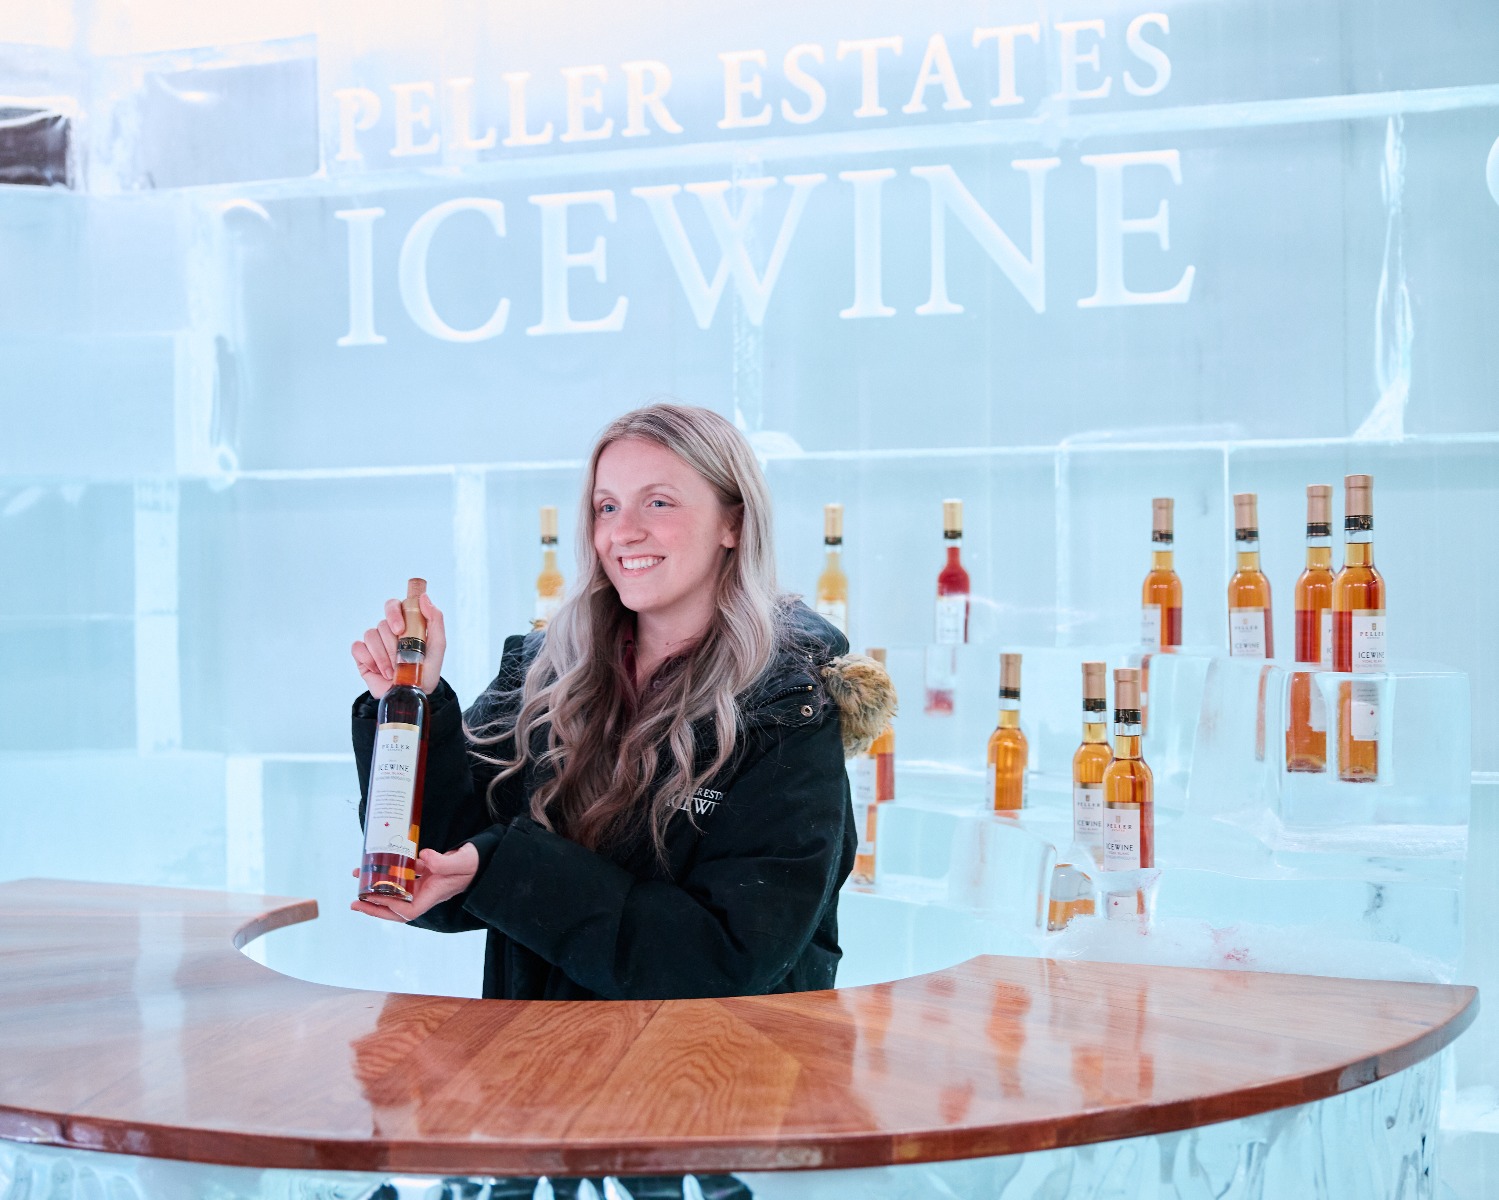 Flying winemaker club offers an exclusive take on wine tourism